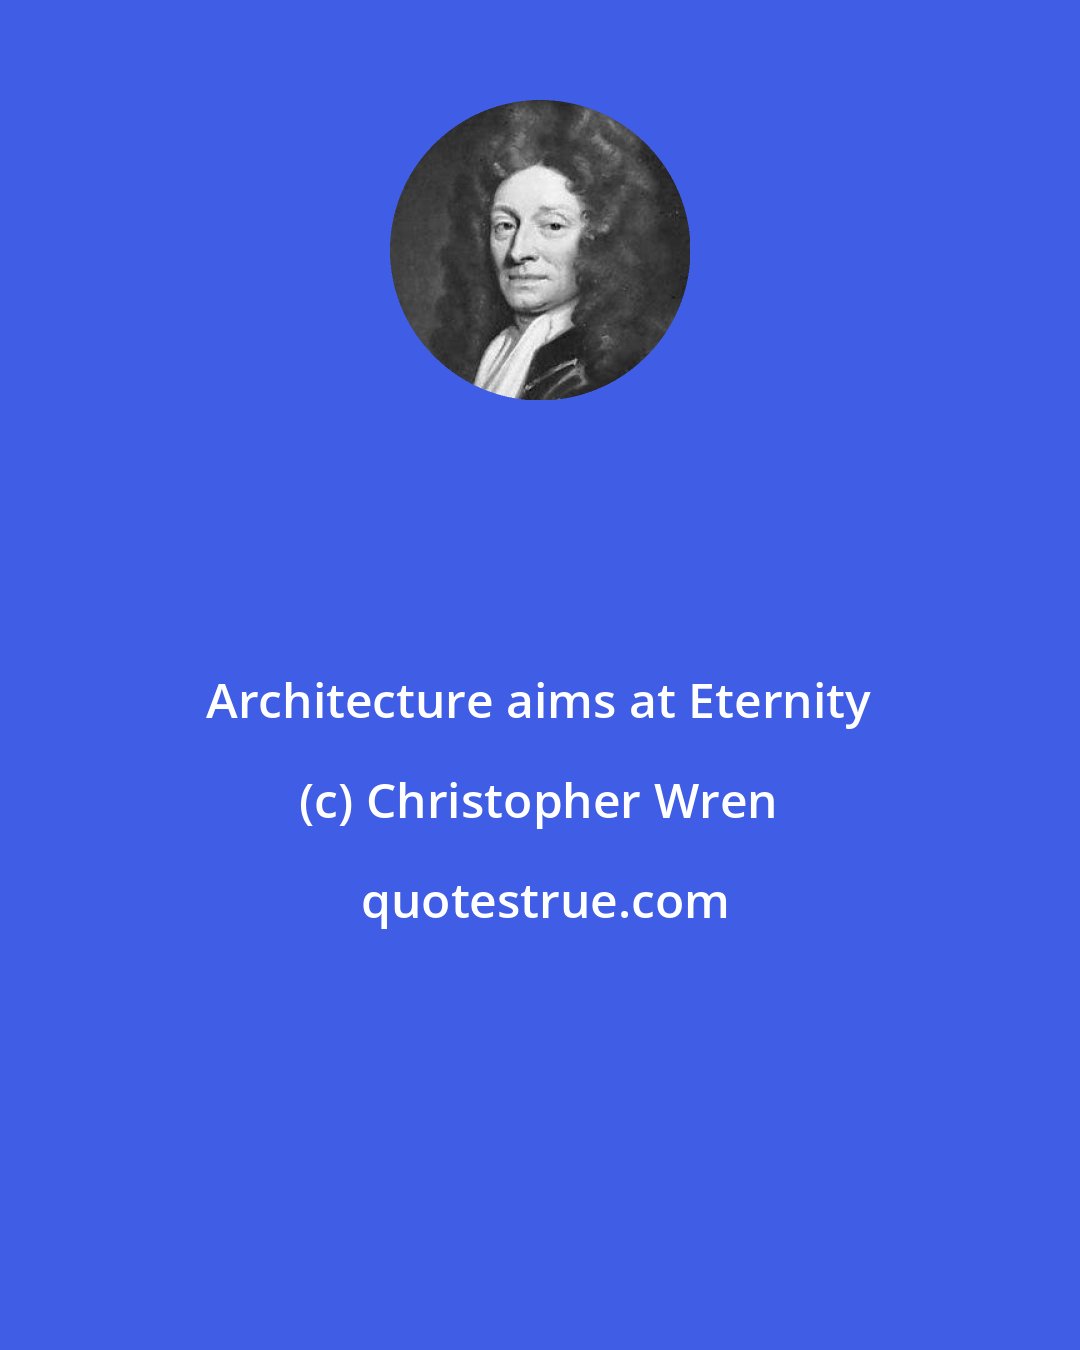 Christopher Wren: Architecture aims at Eternity